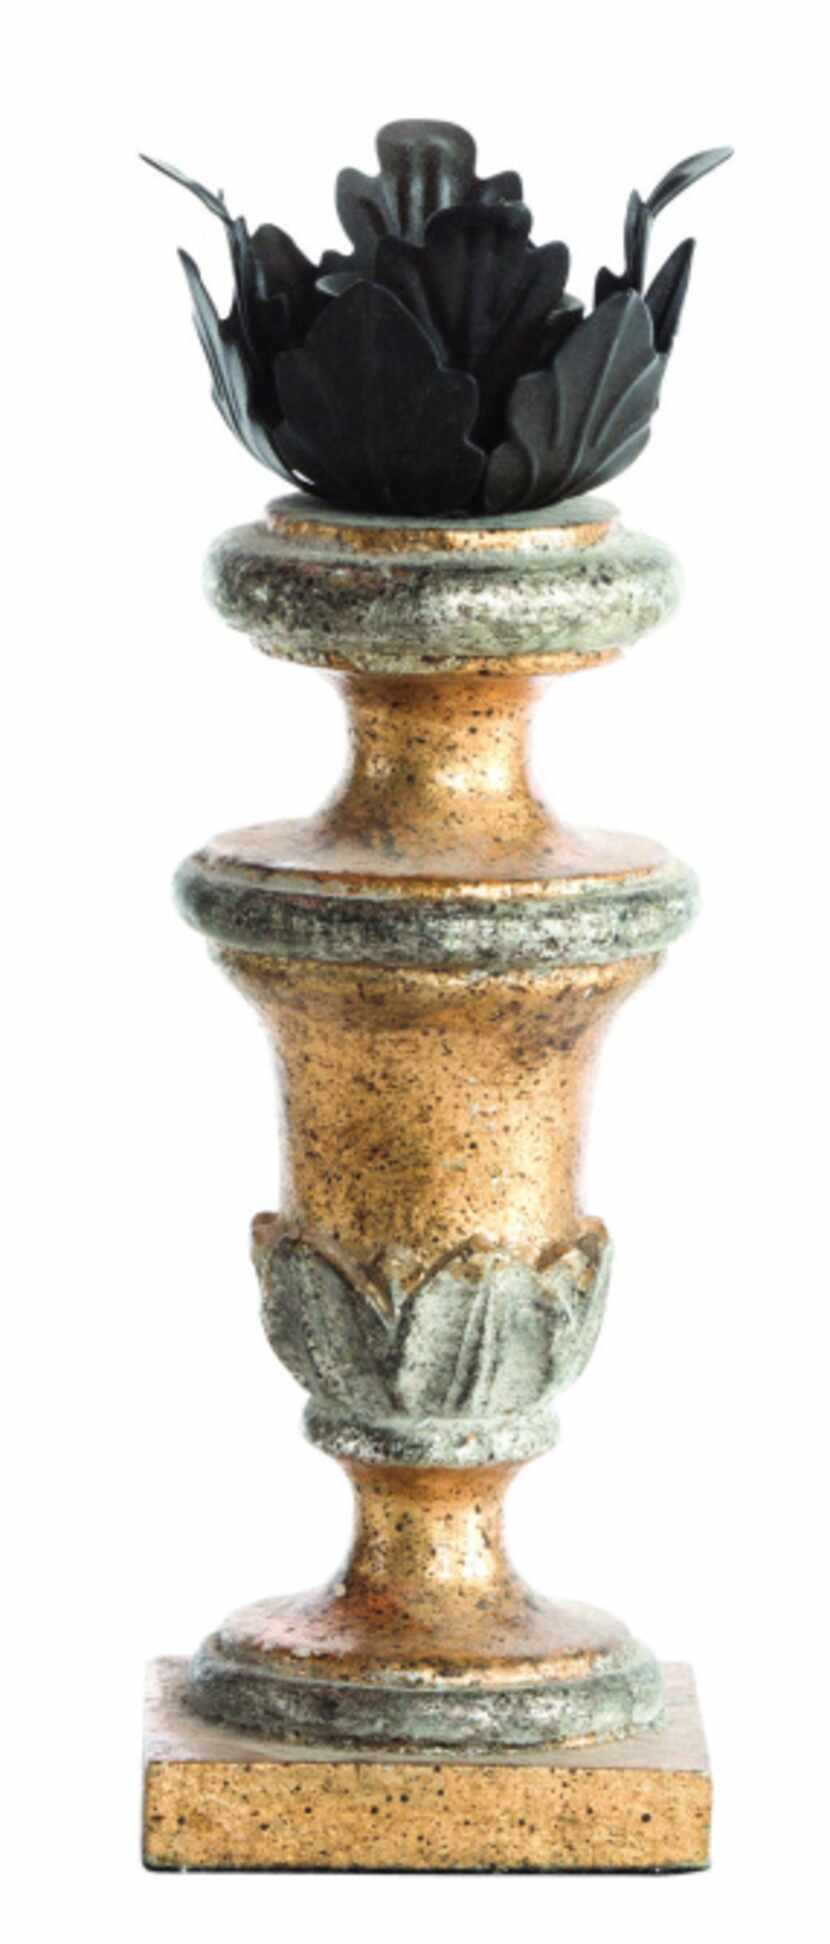 Hand-painted resin adds an antique essence to 8-inch candlesticks by Aidan Gray Home. $49.50...